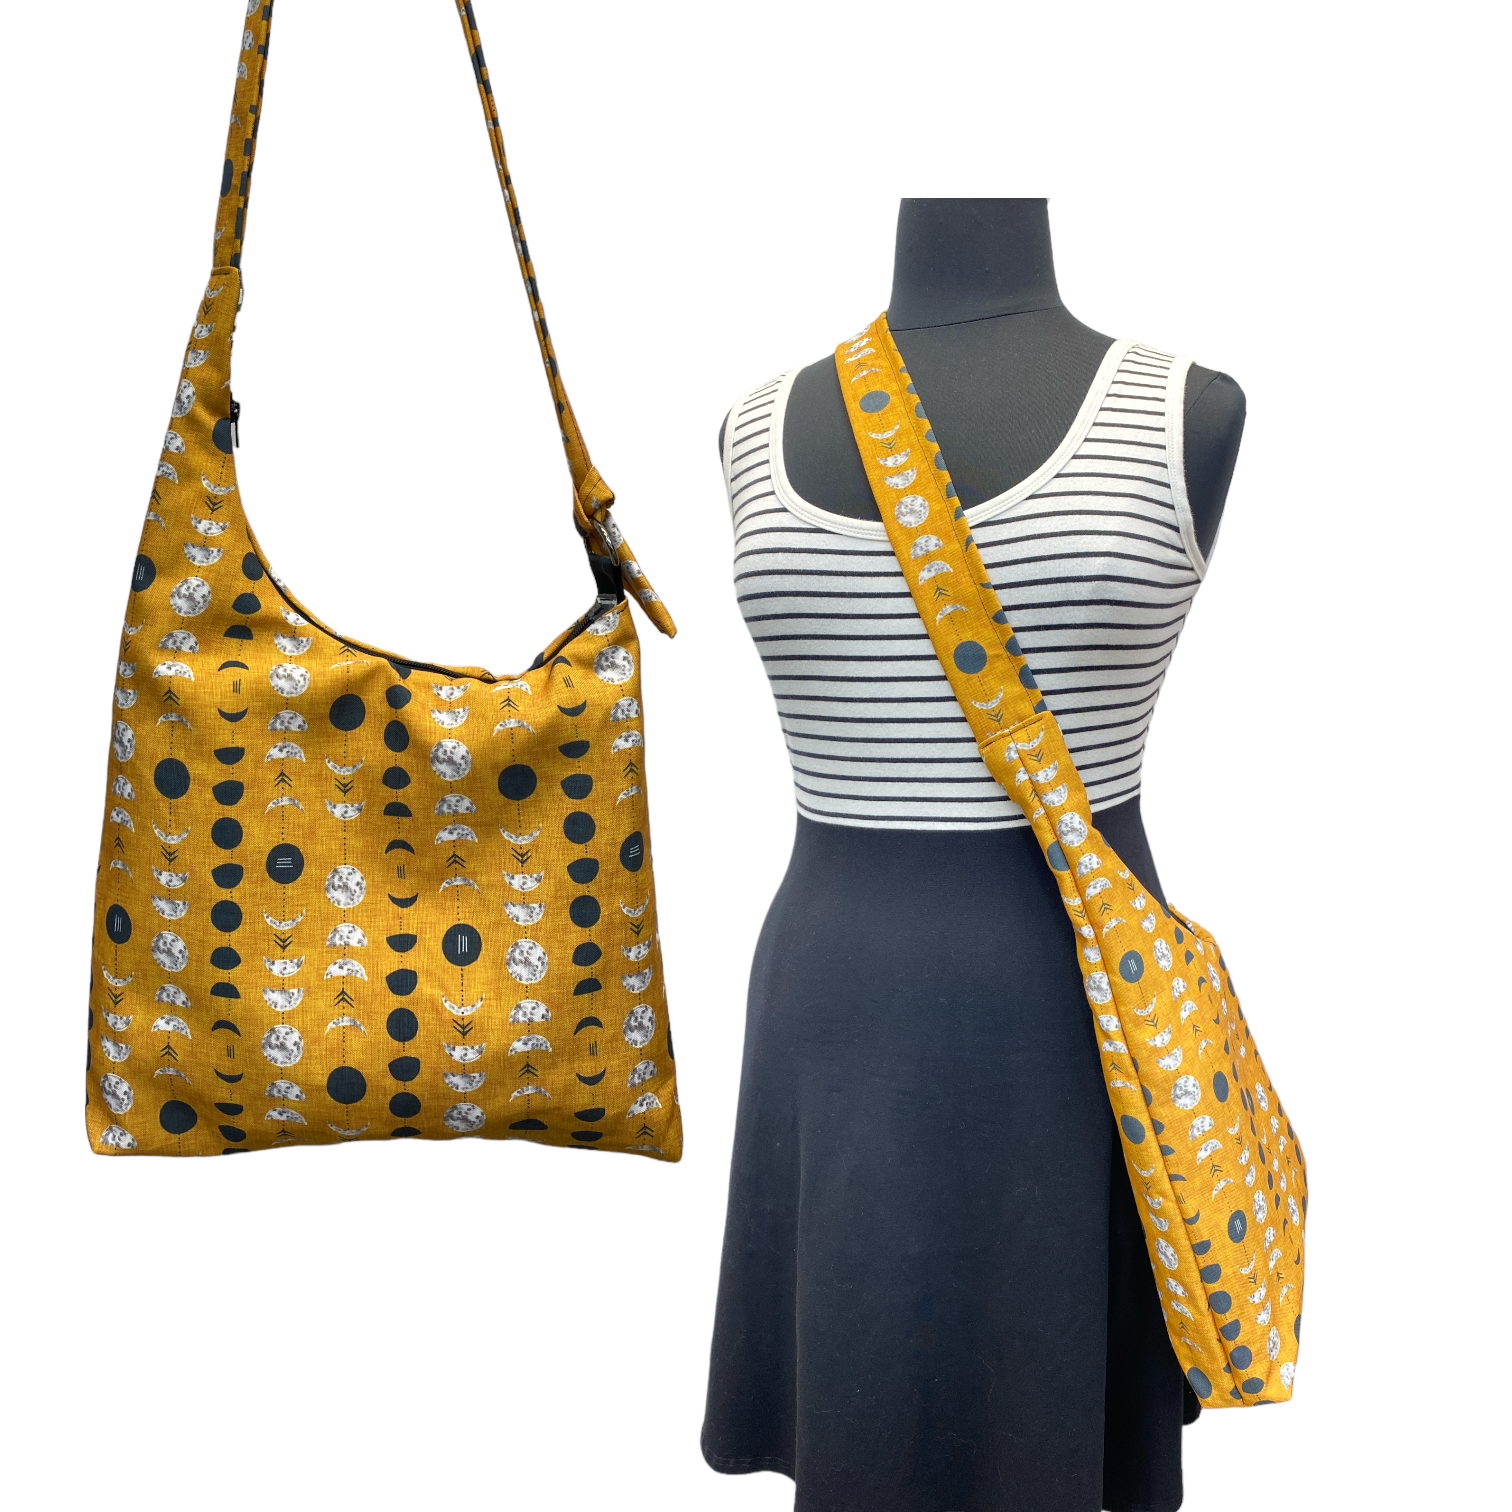 Simple Sack SLING - Moon Phases Yellow Gold